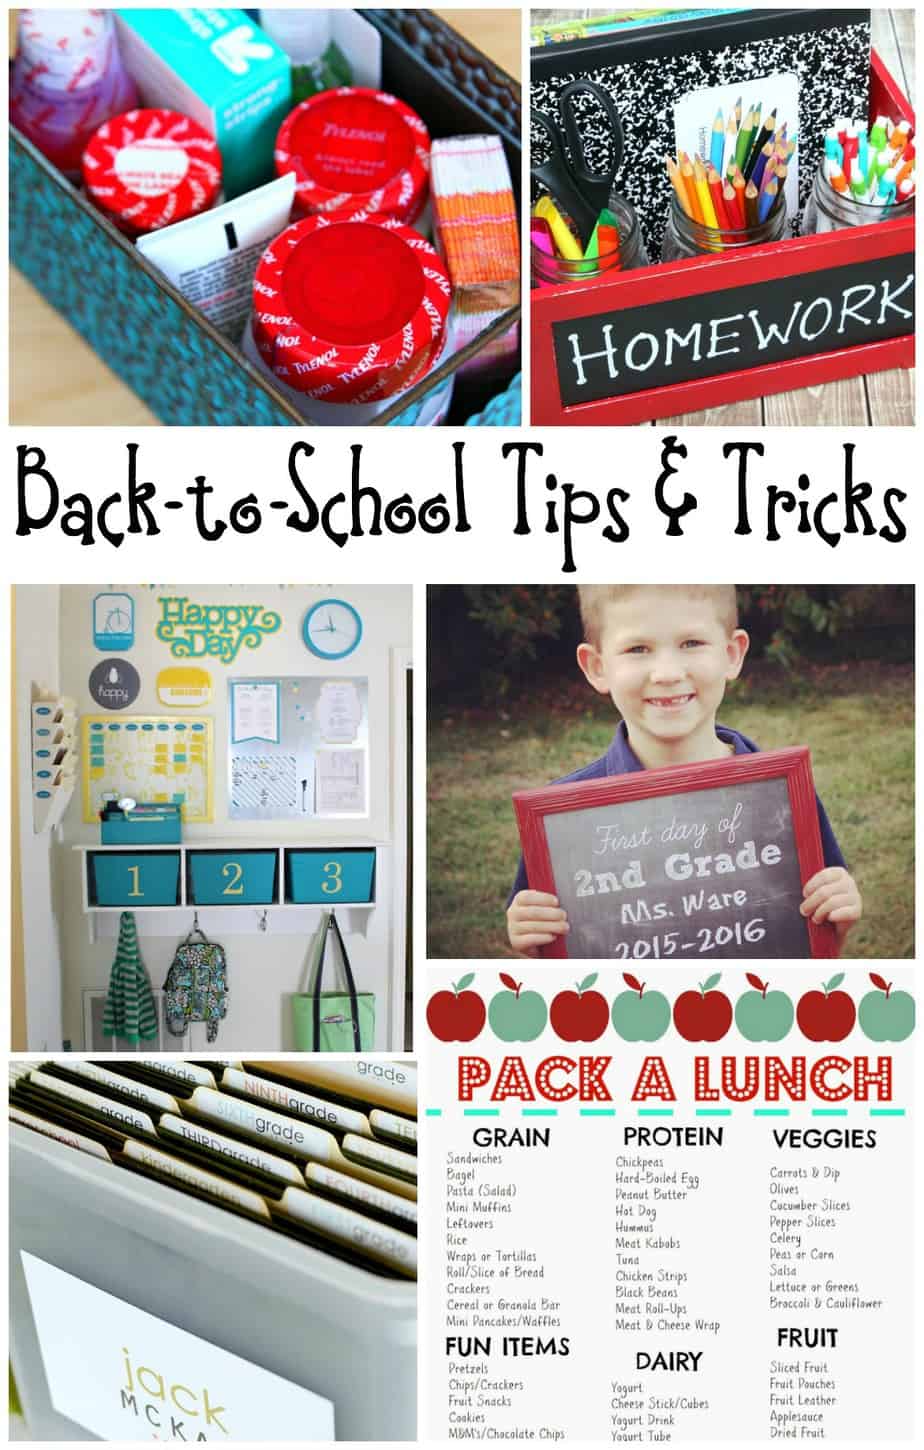 Back-to-School Tips and Tricks